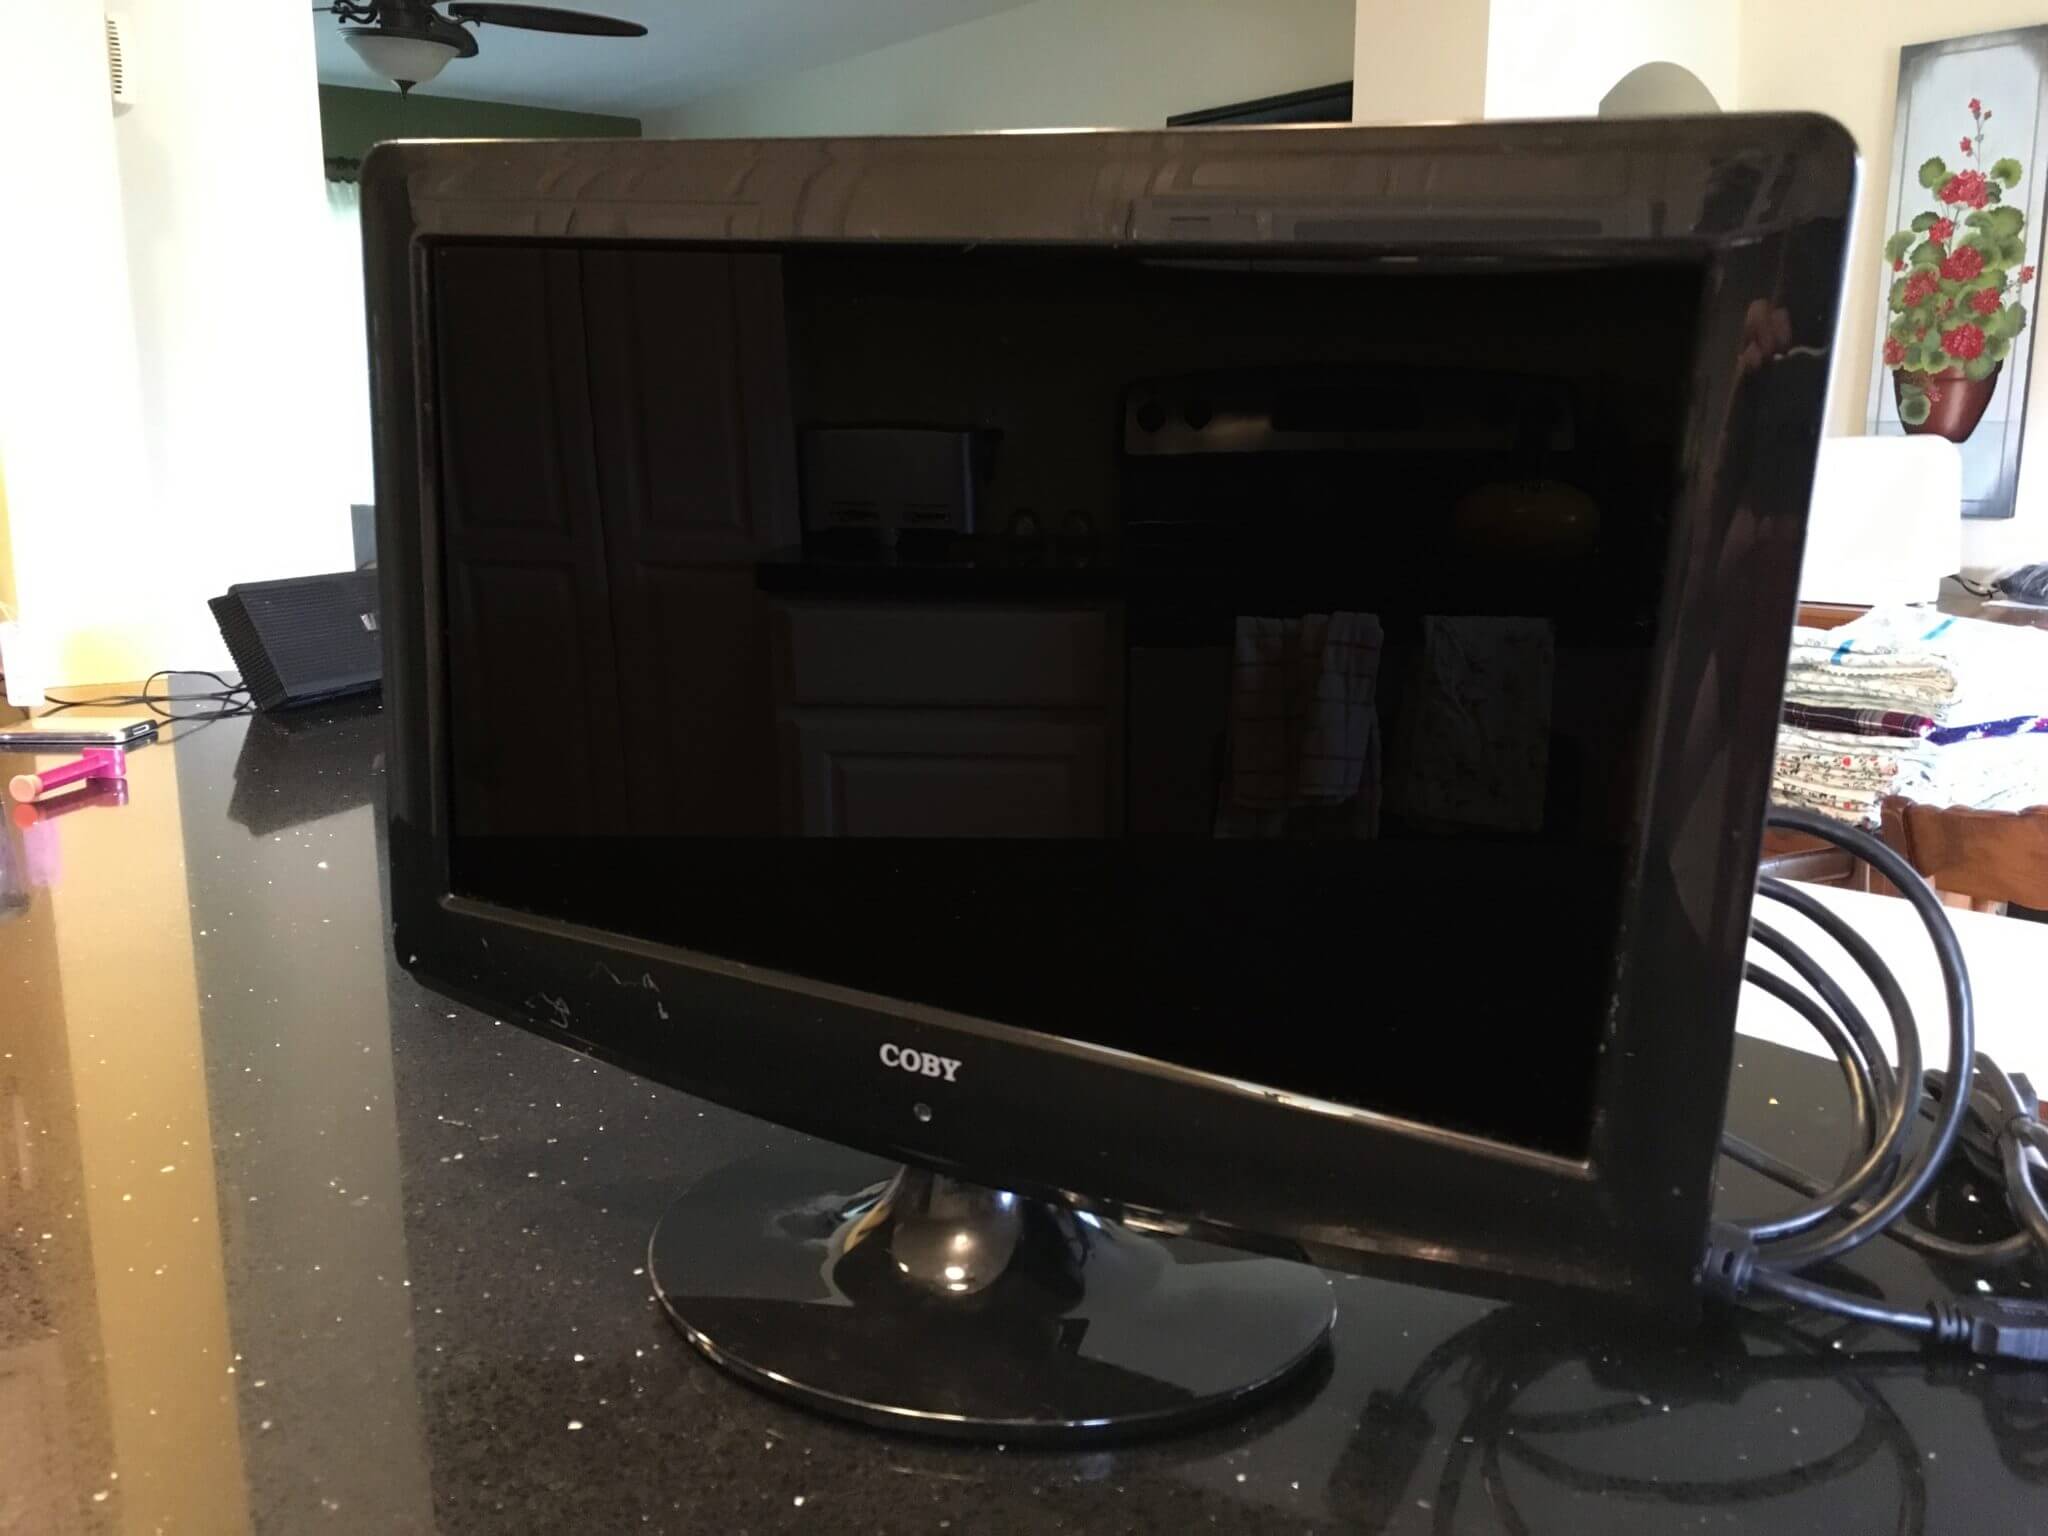 A Coby TFTV1525 15″ monitor/TV, purchased used, missing remote